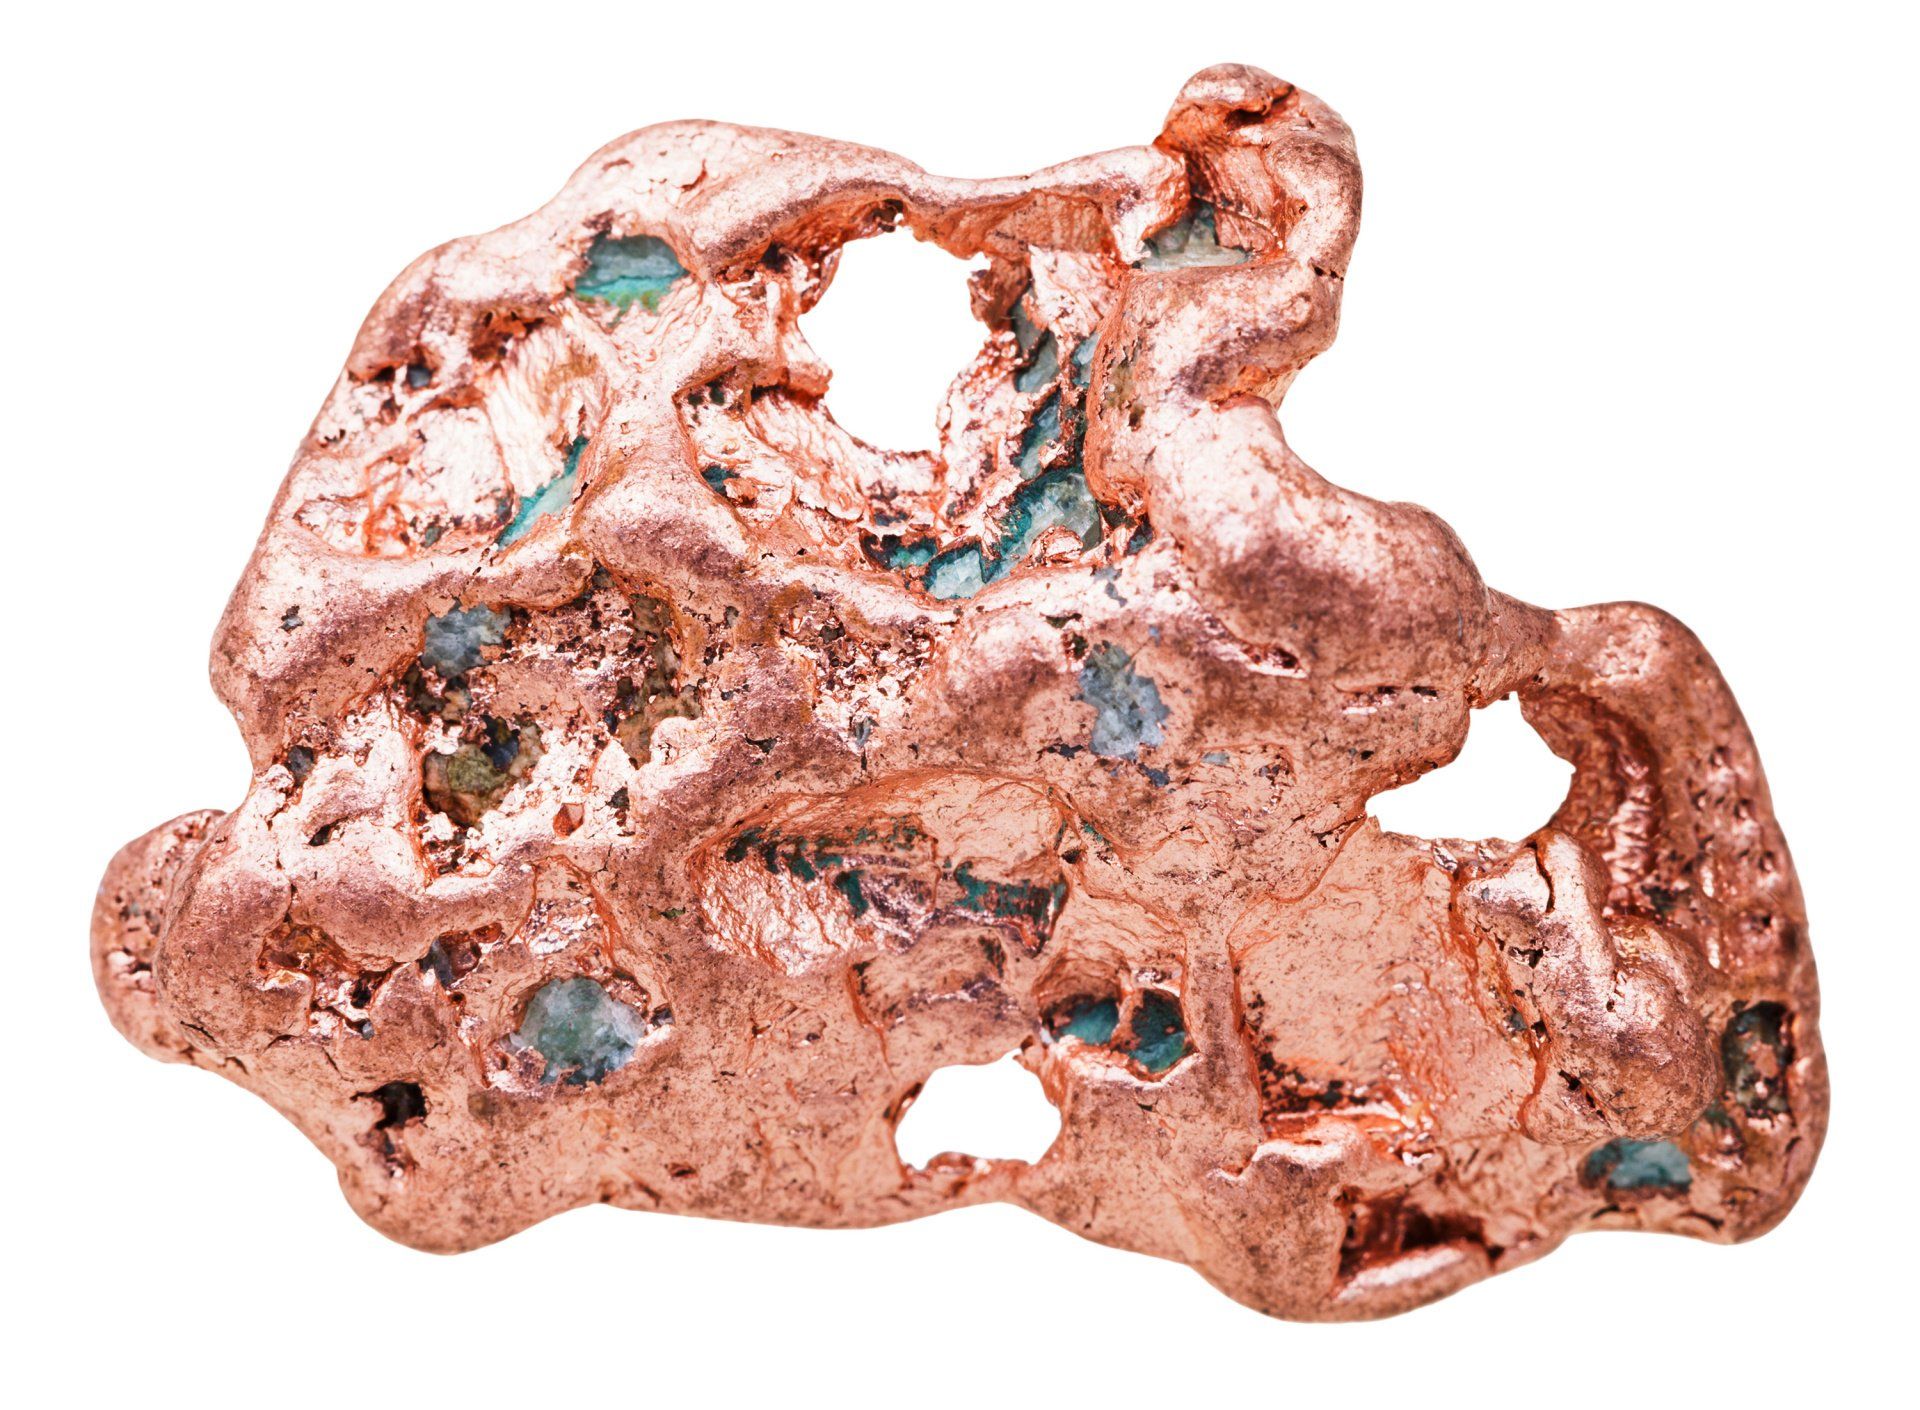 natural copper becoming more valuable? | Fullerton Financial